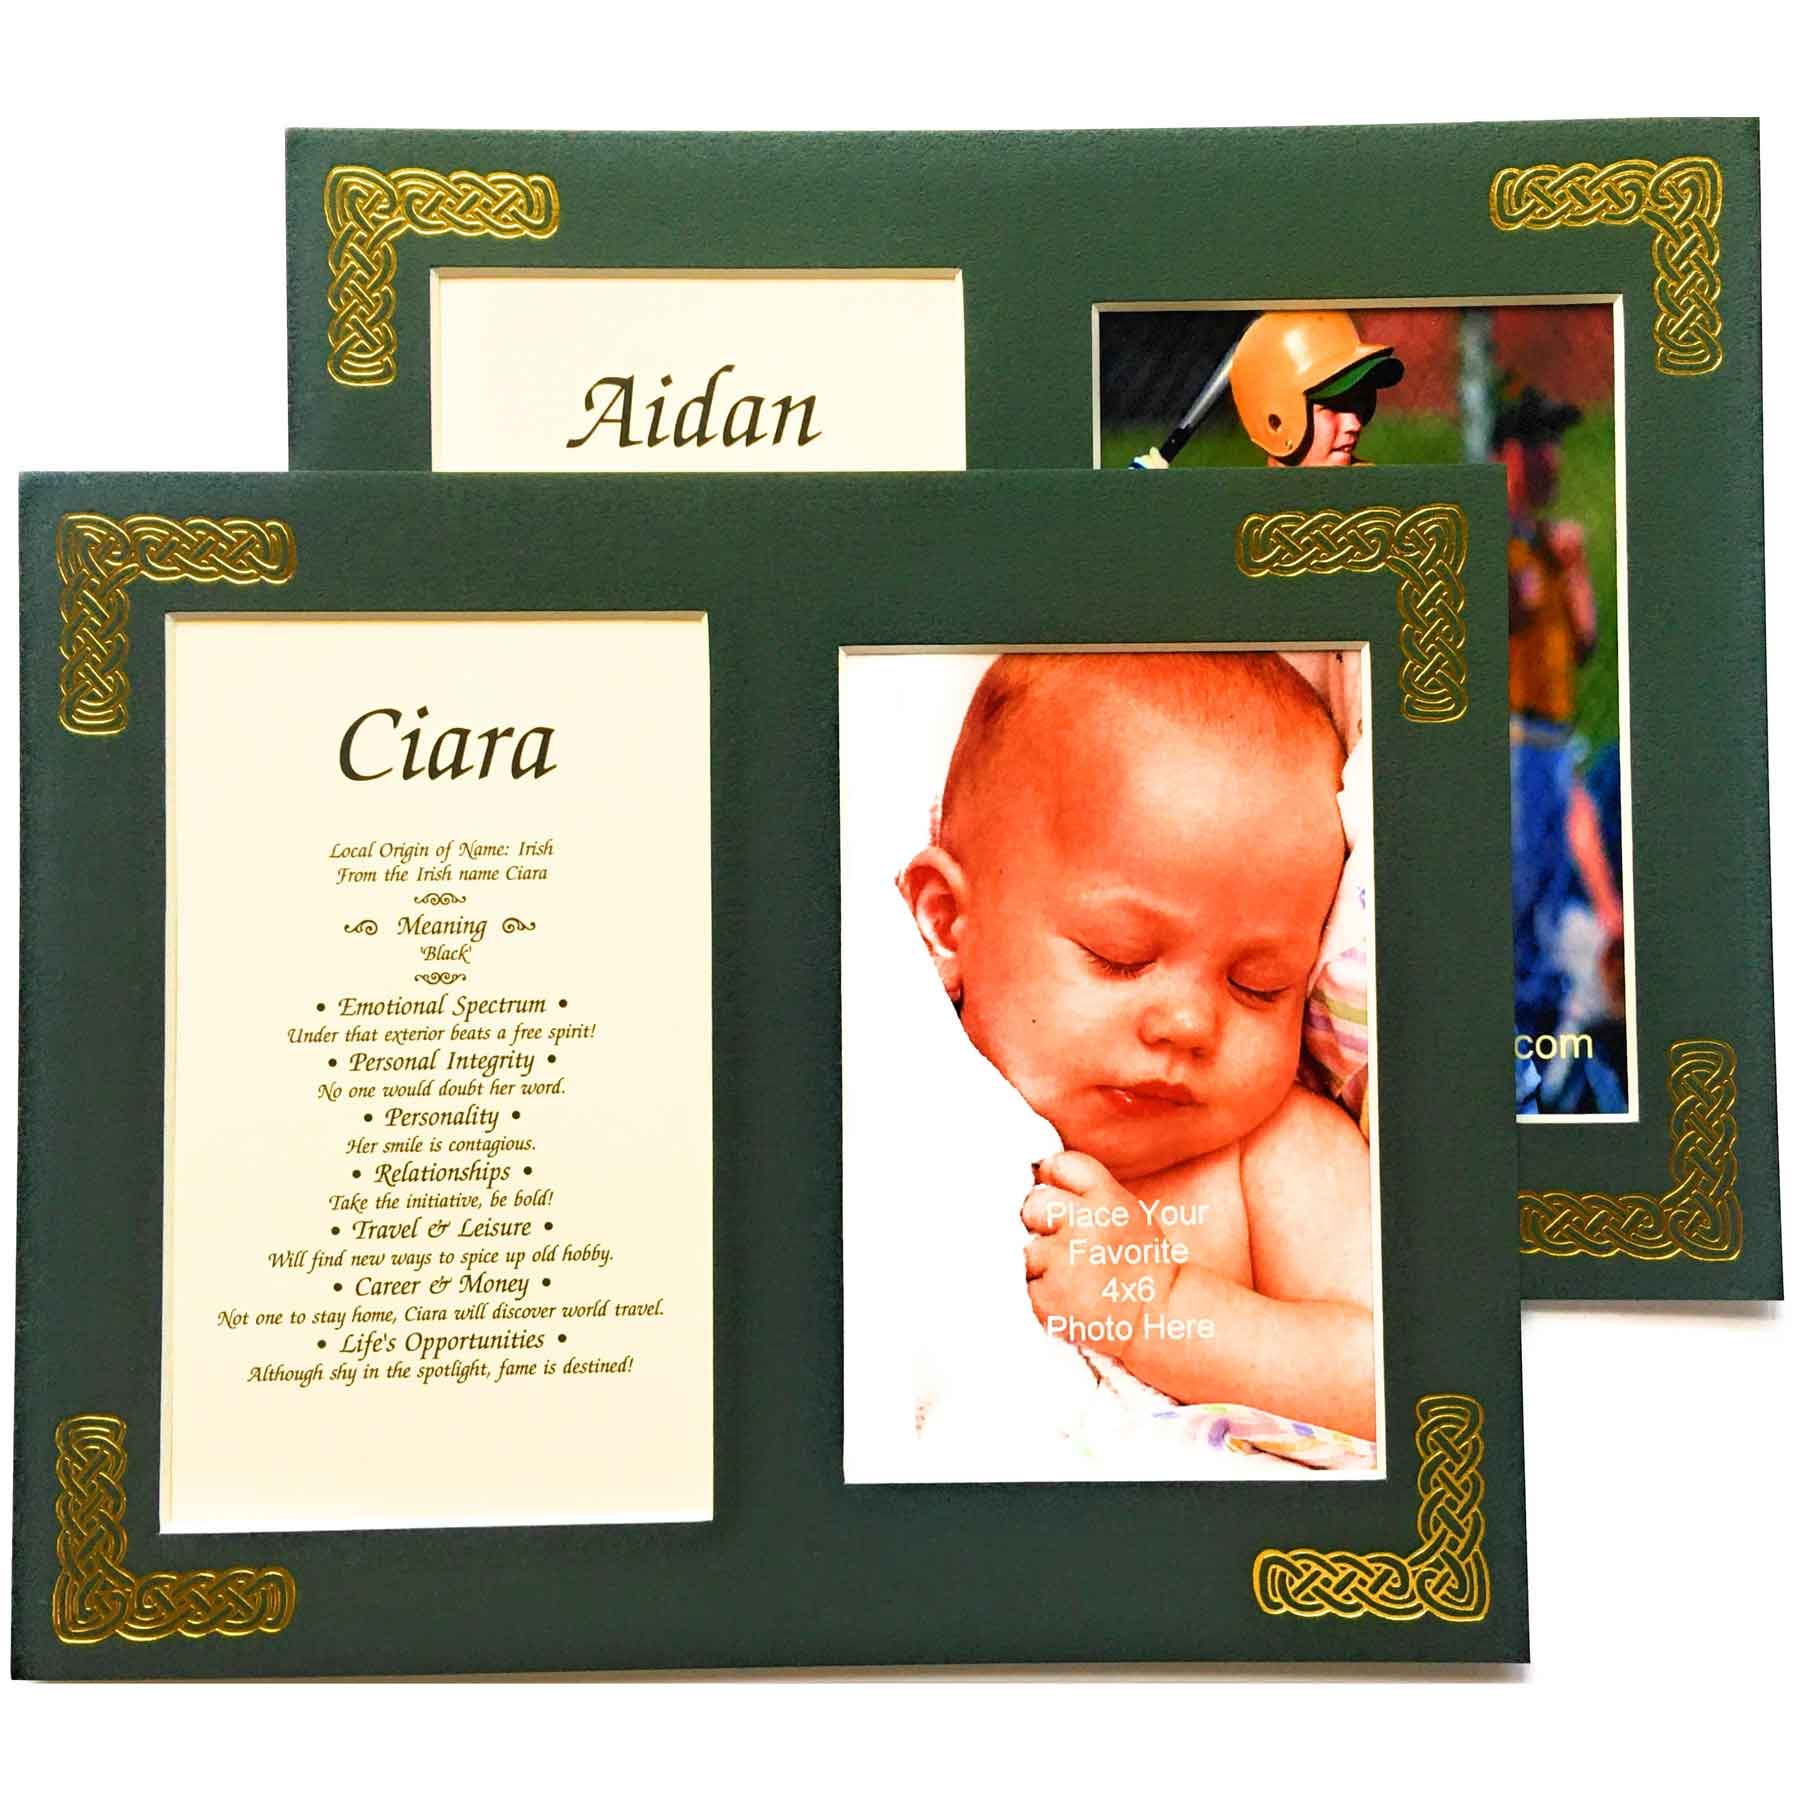 Irish Shamrock Photo Mat With Frame - Frame Your 4x6 Pictures or